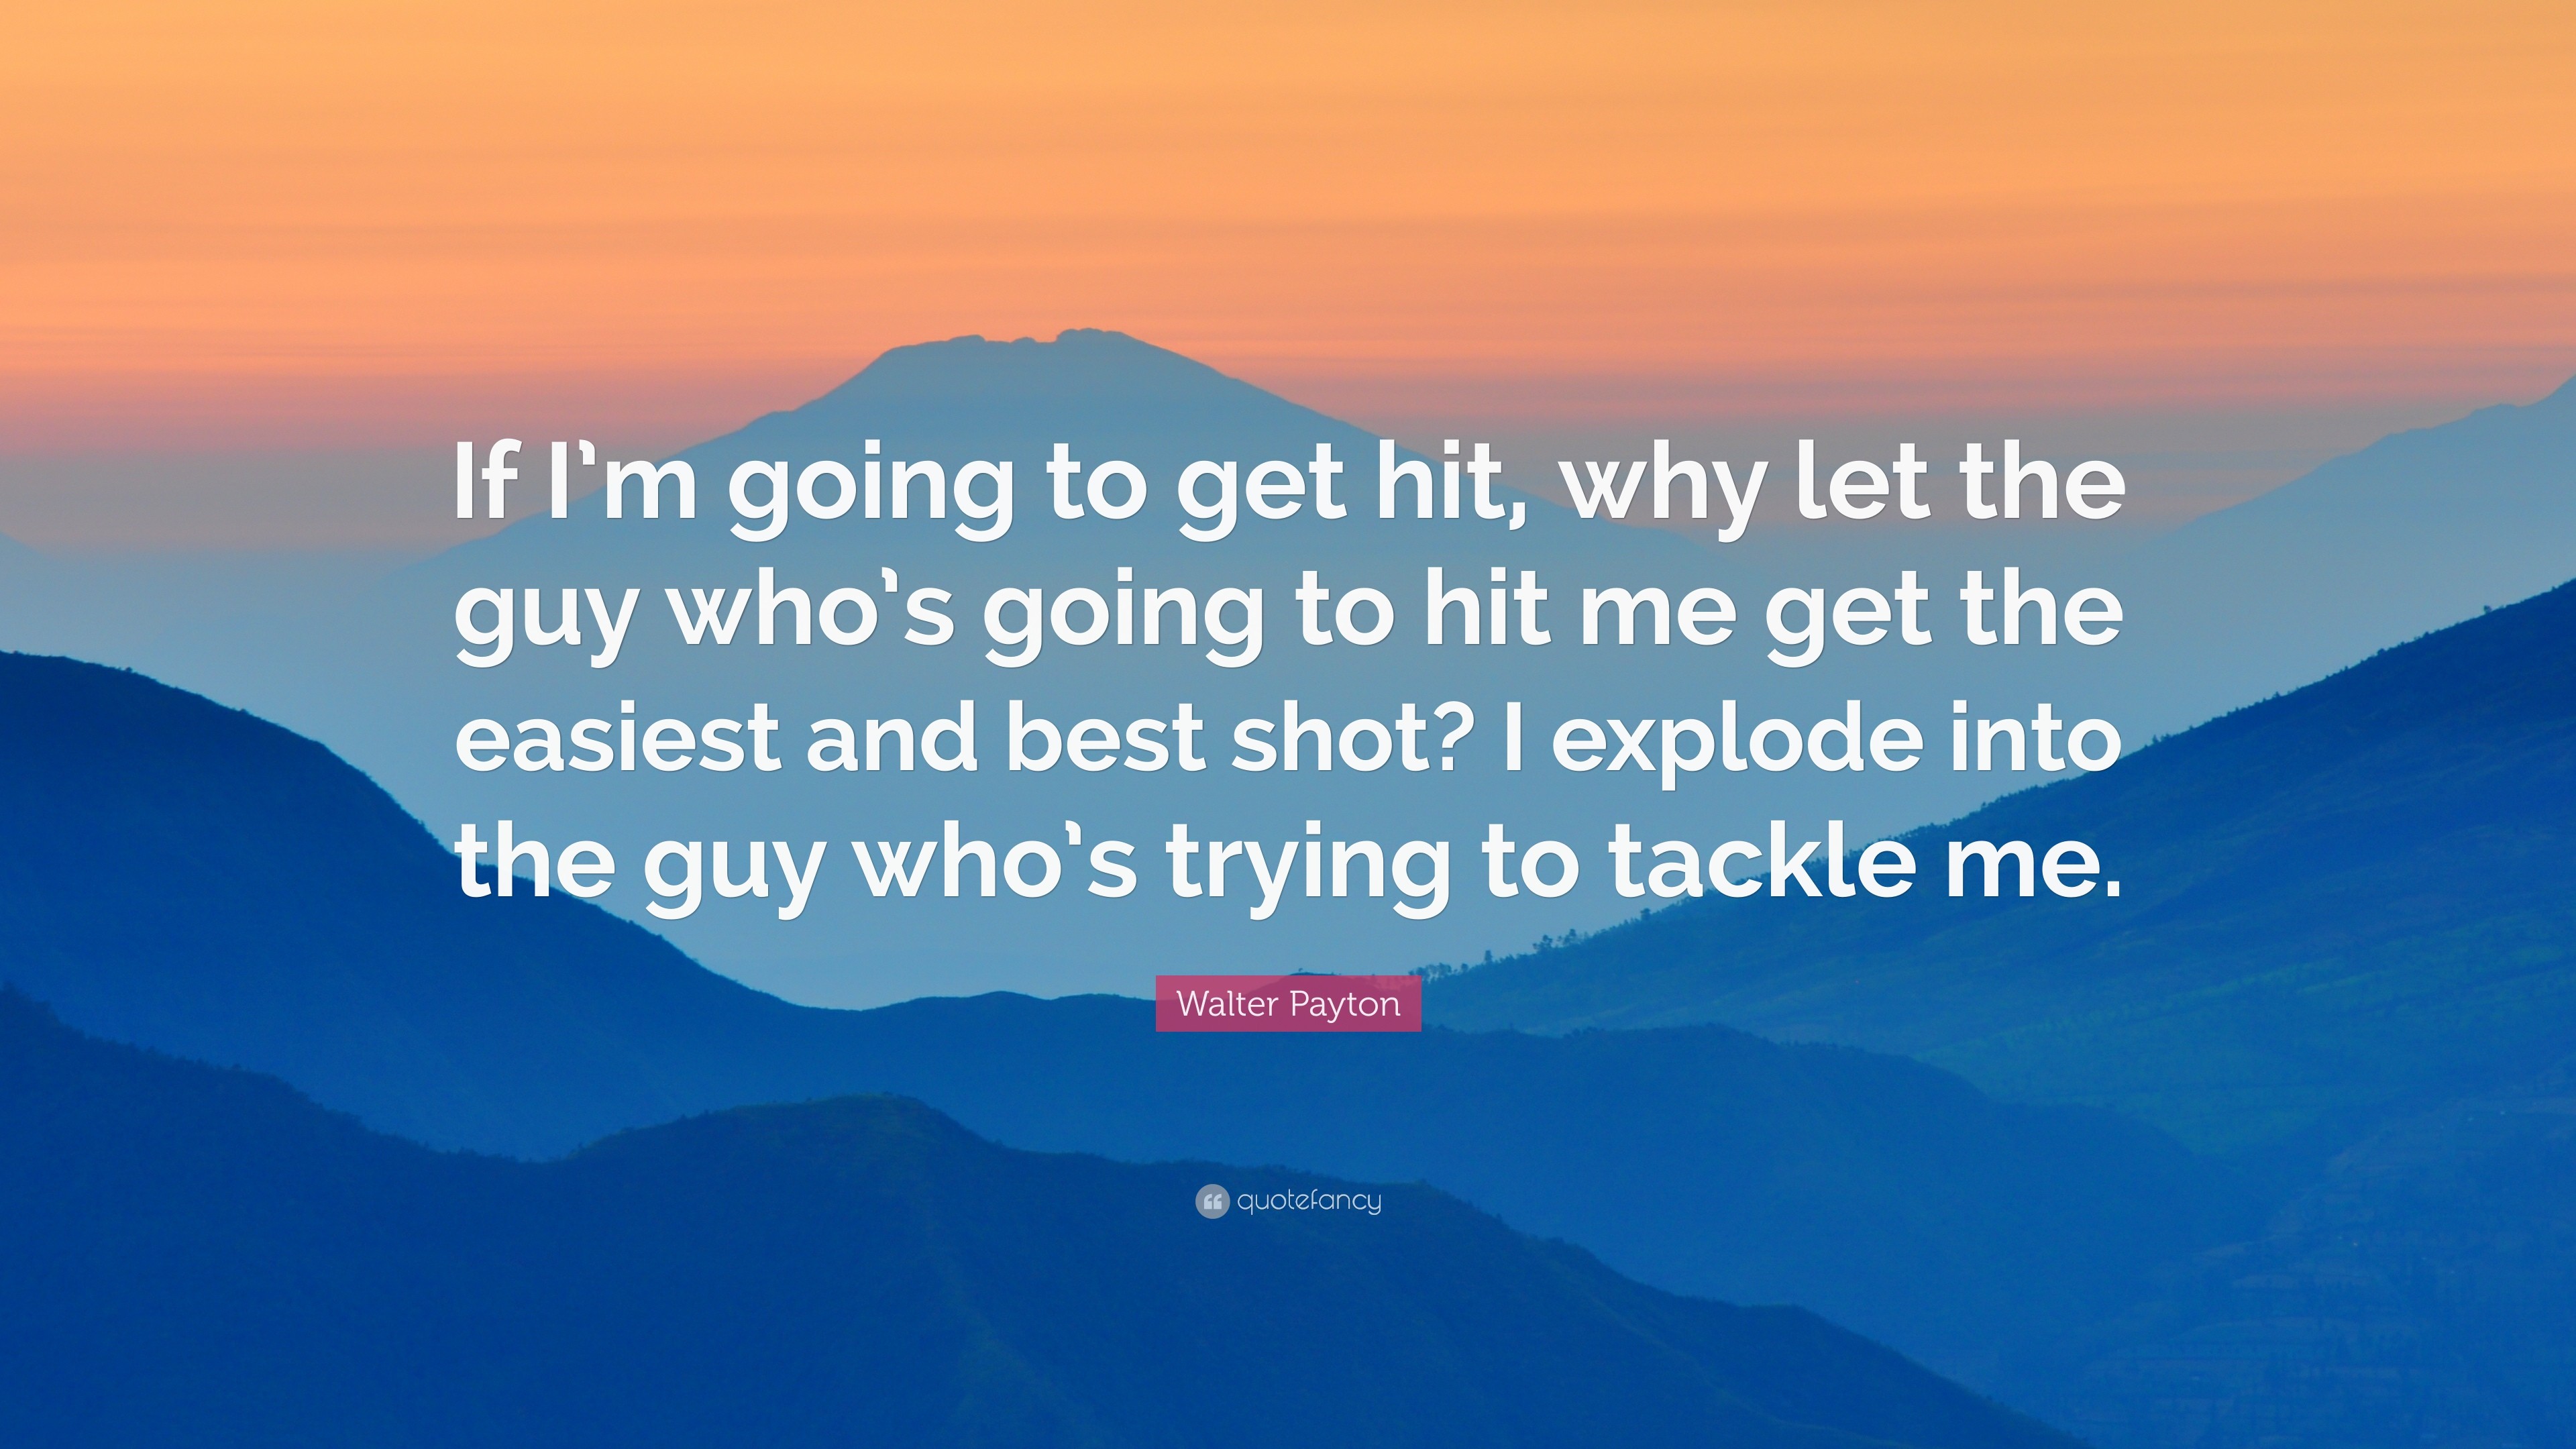 3840x2160 Walter Payton Quote: “If I'm going to get hit, why let